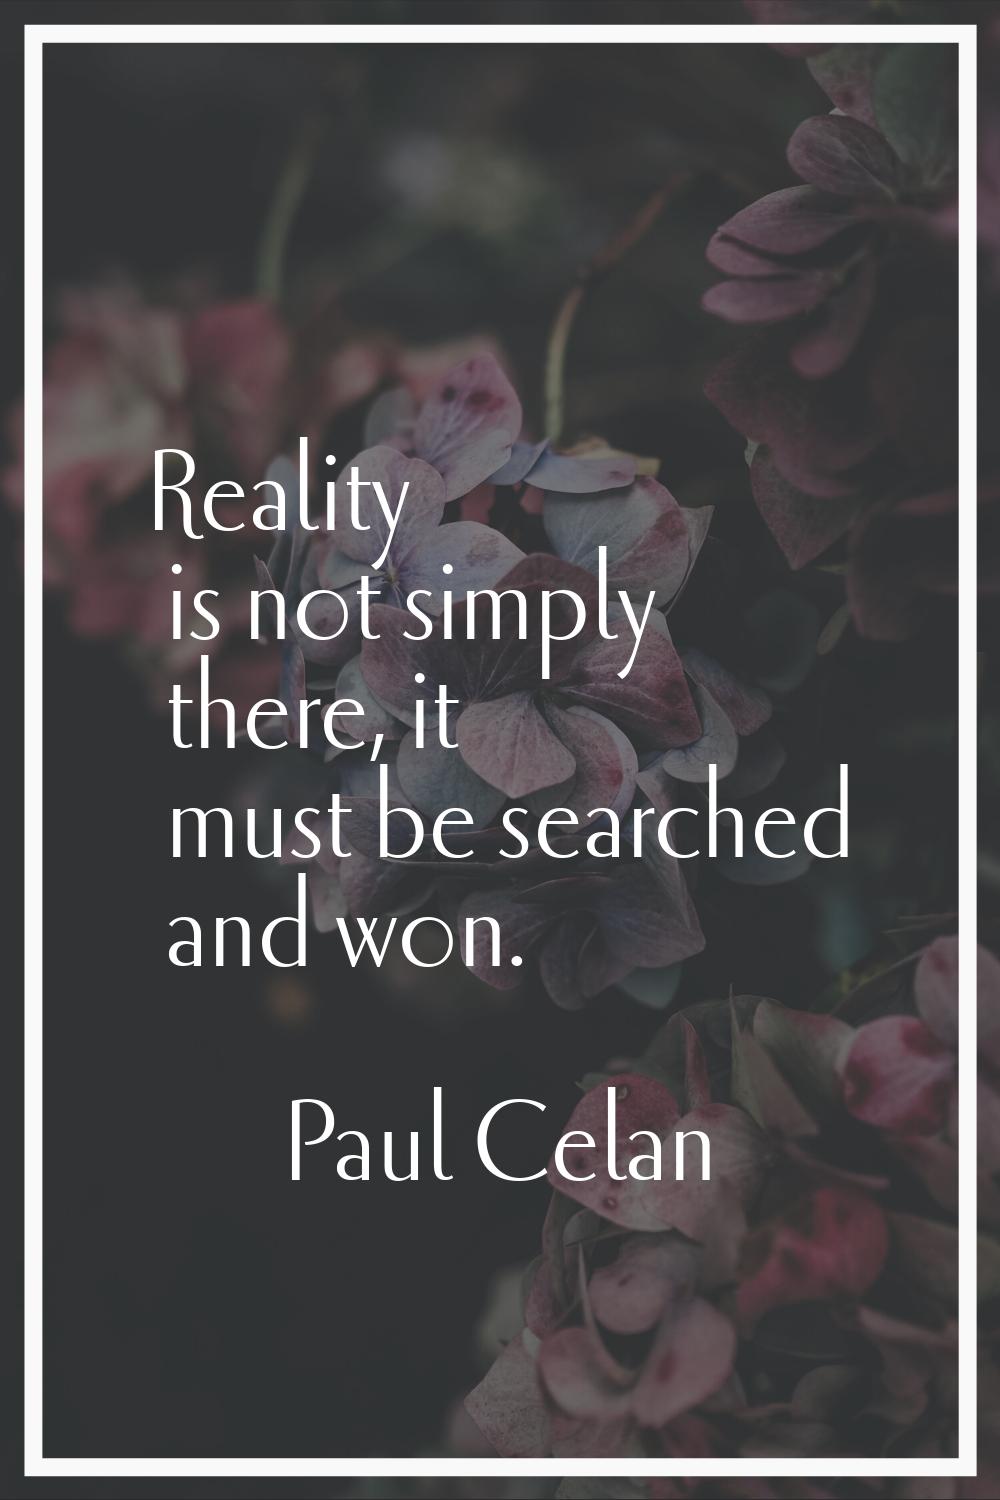 Reality is not simply there, it must be searched and won.